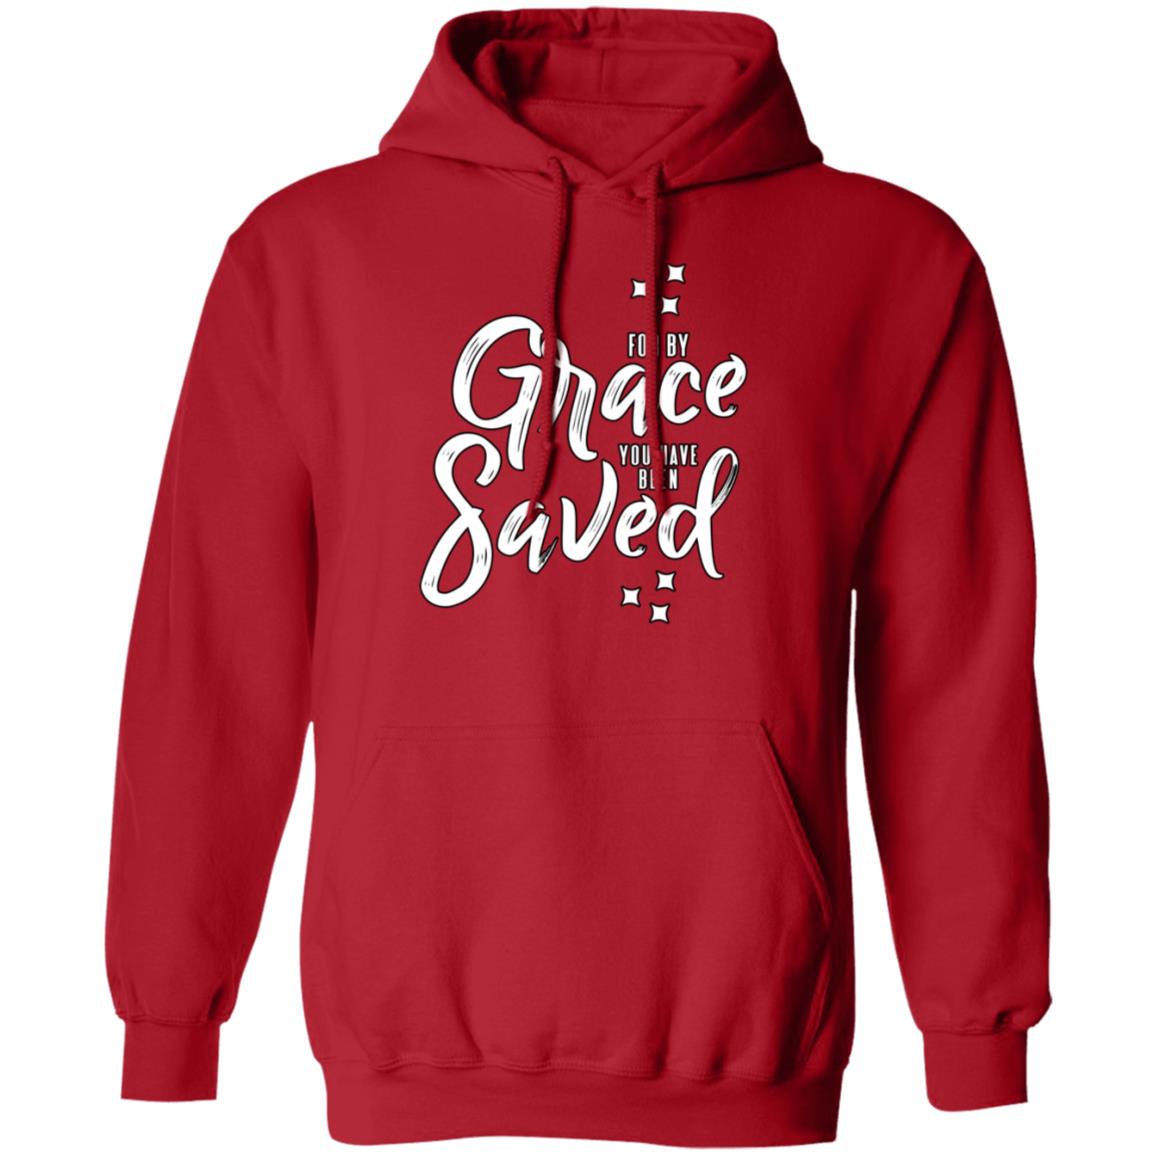 For by Grace (Unisex Hoodie)